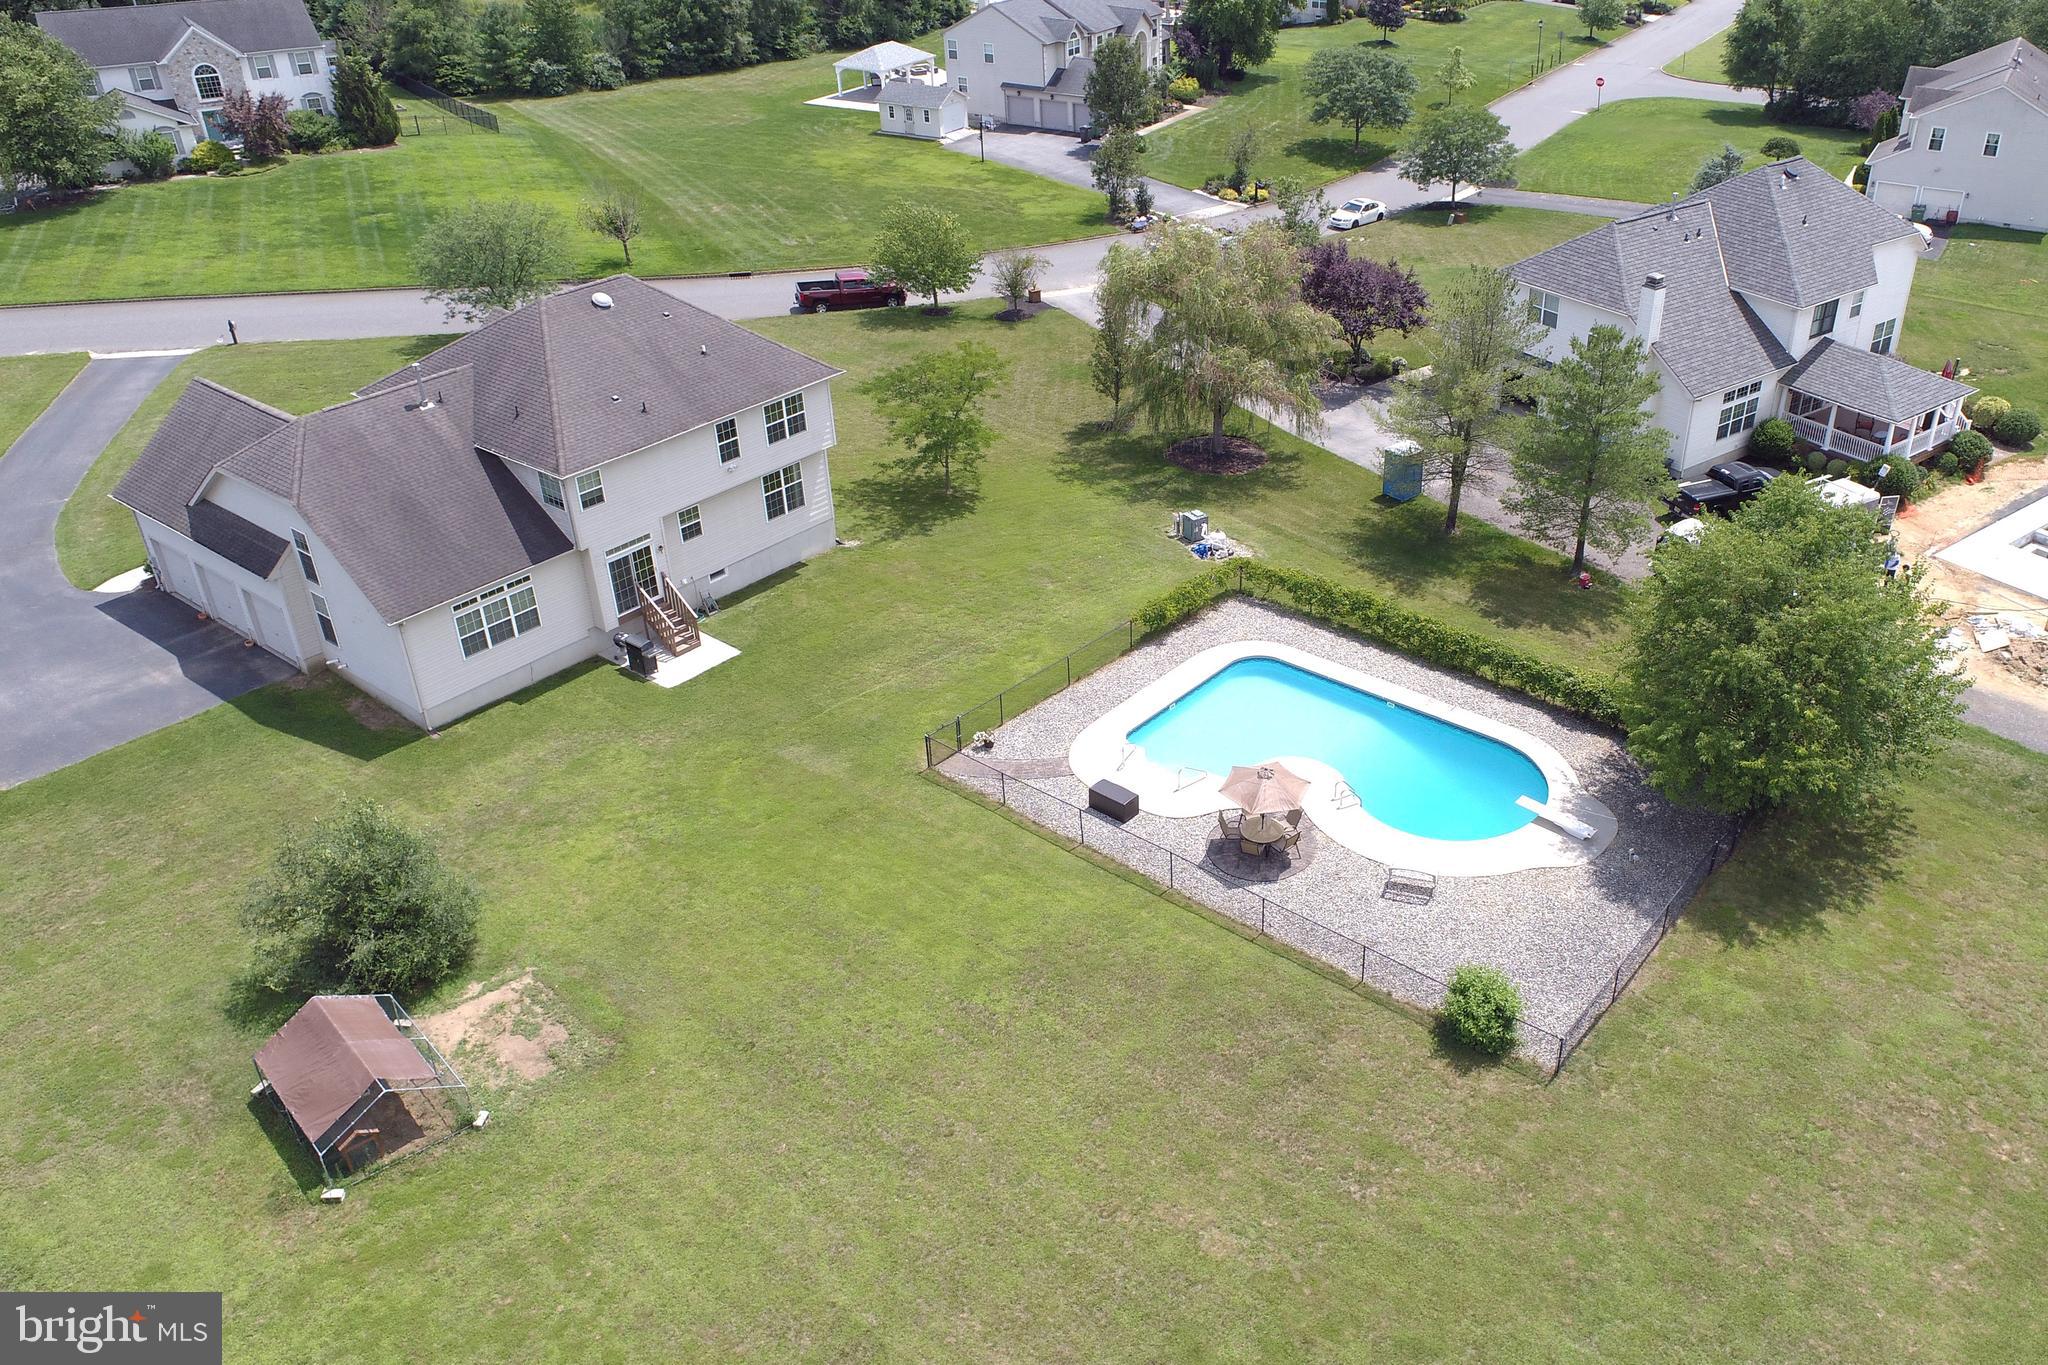 an aerial view of a house with outdoor space lake view